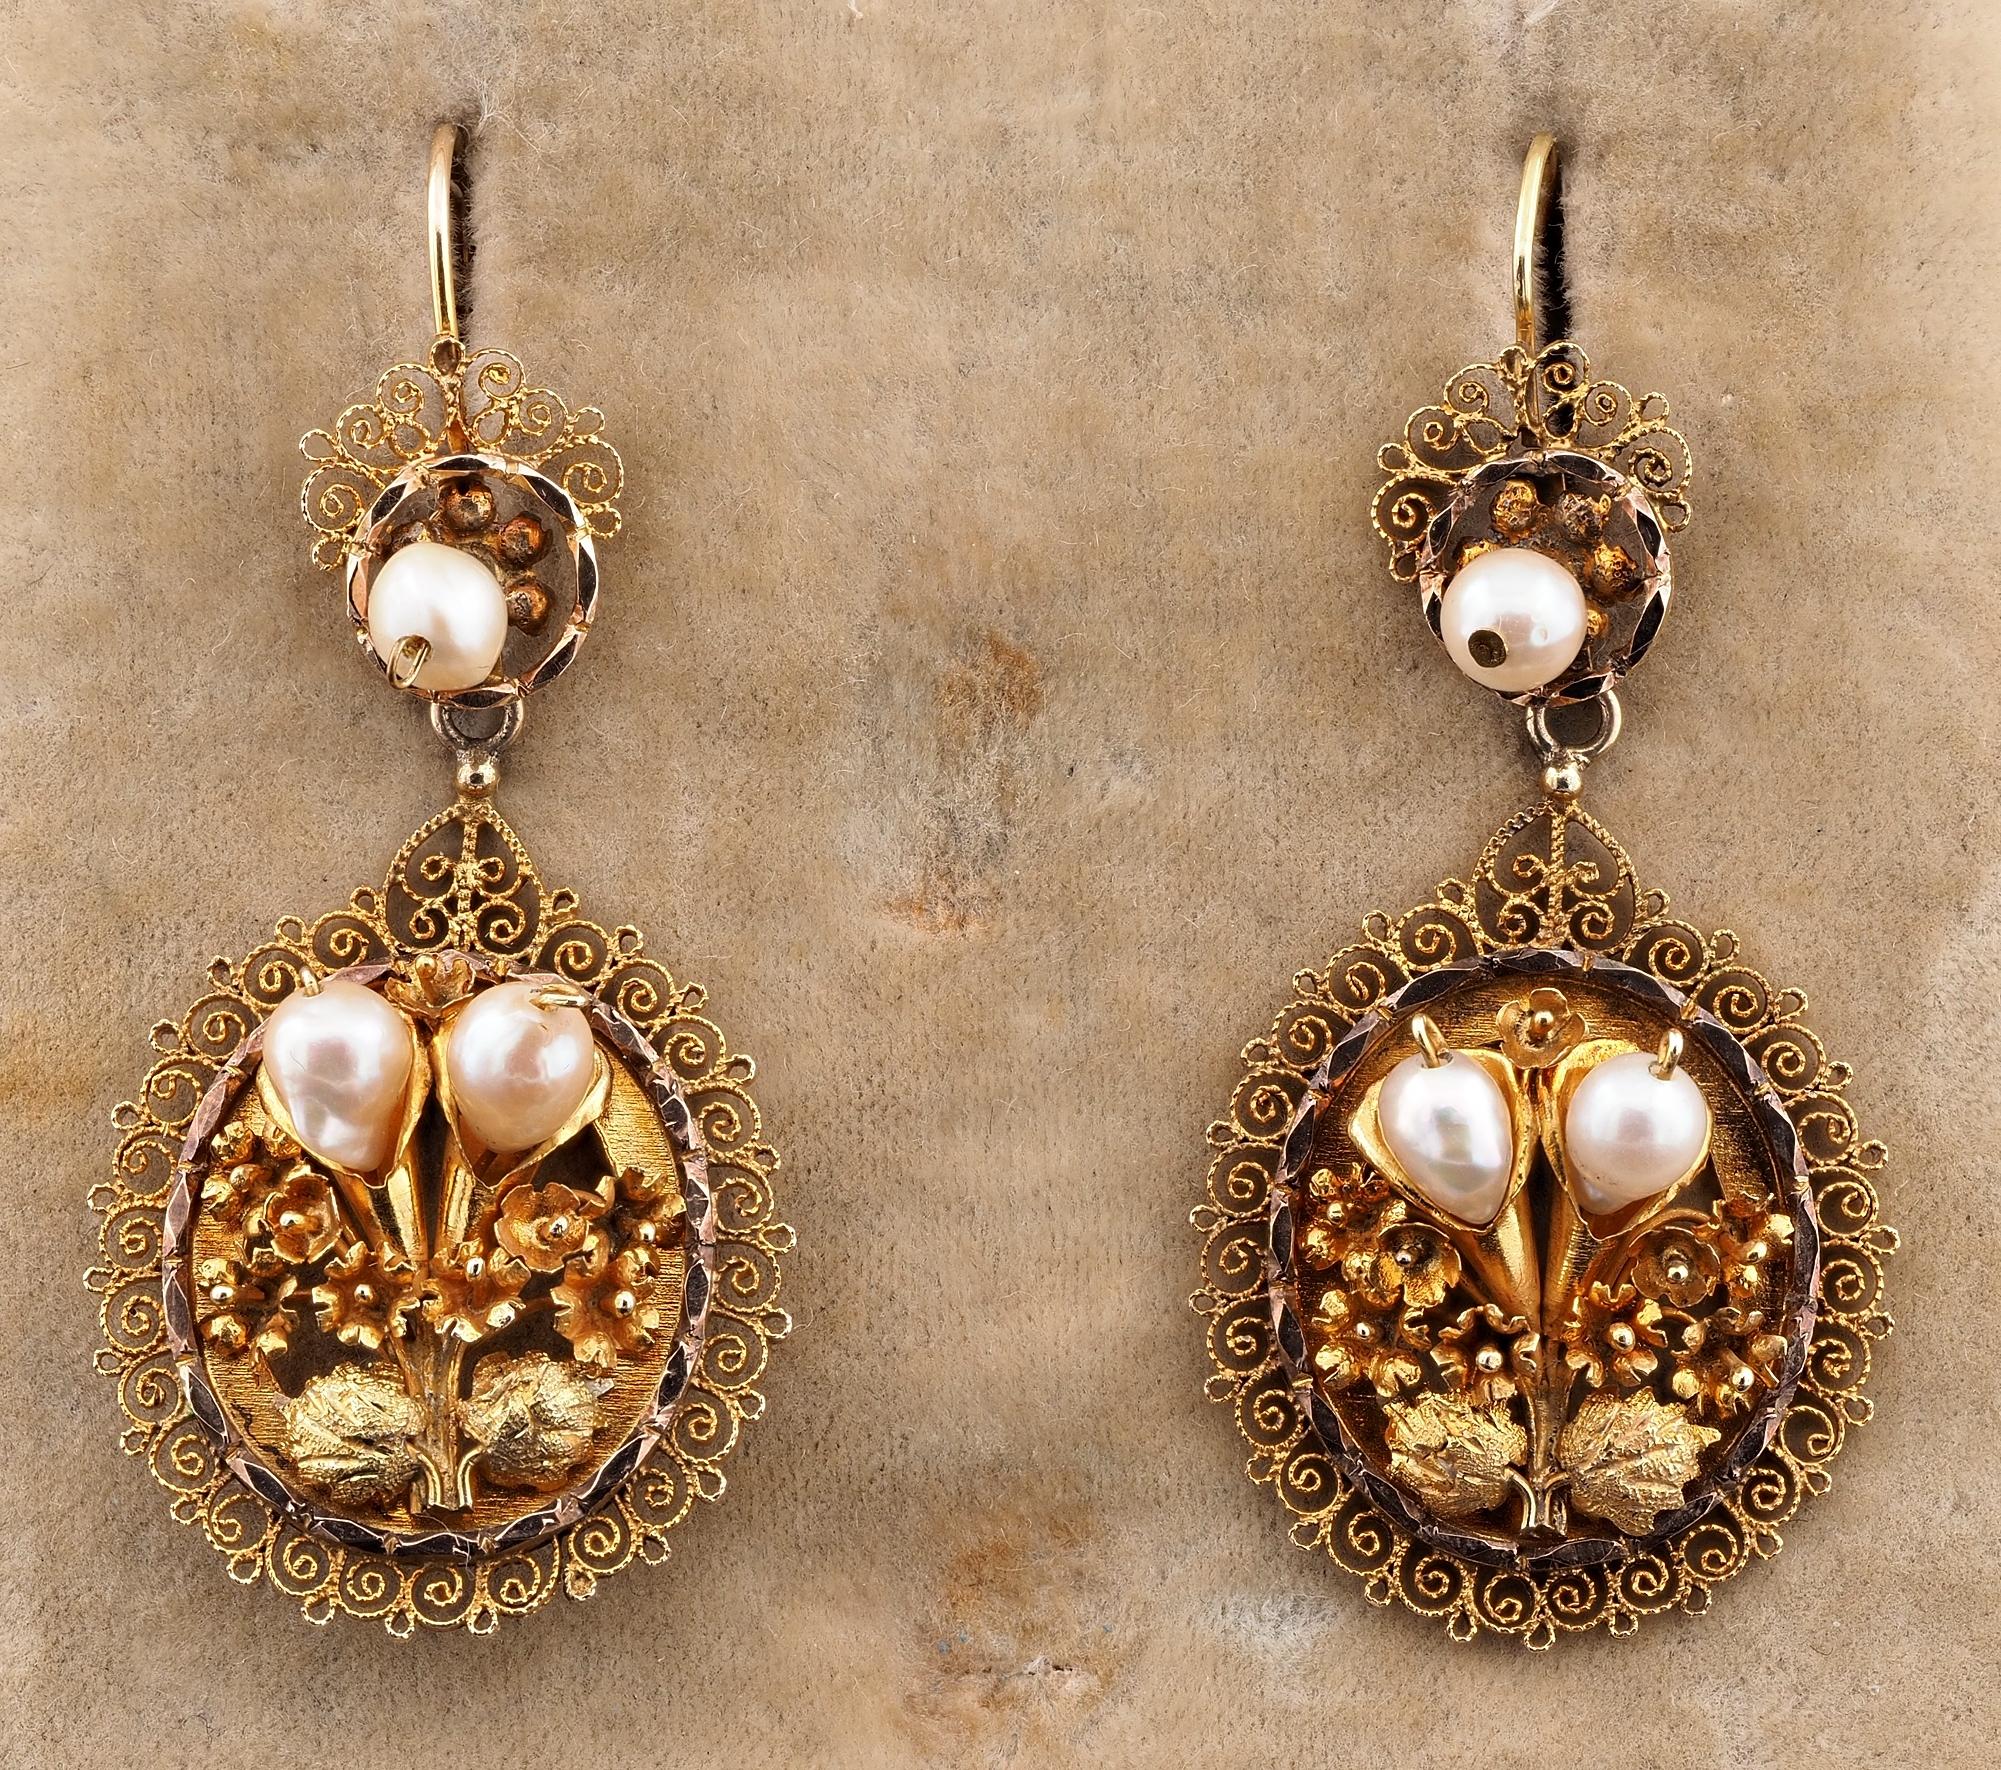 Georgian to Treasure
Quite spectacular in design these antique drop earrings, 18 KT solid gold, hand crafted during the Georgian period , 1820 ca
They are of amazing workmanship, the main panel is a large oval with a centre bunch of flower artwork,